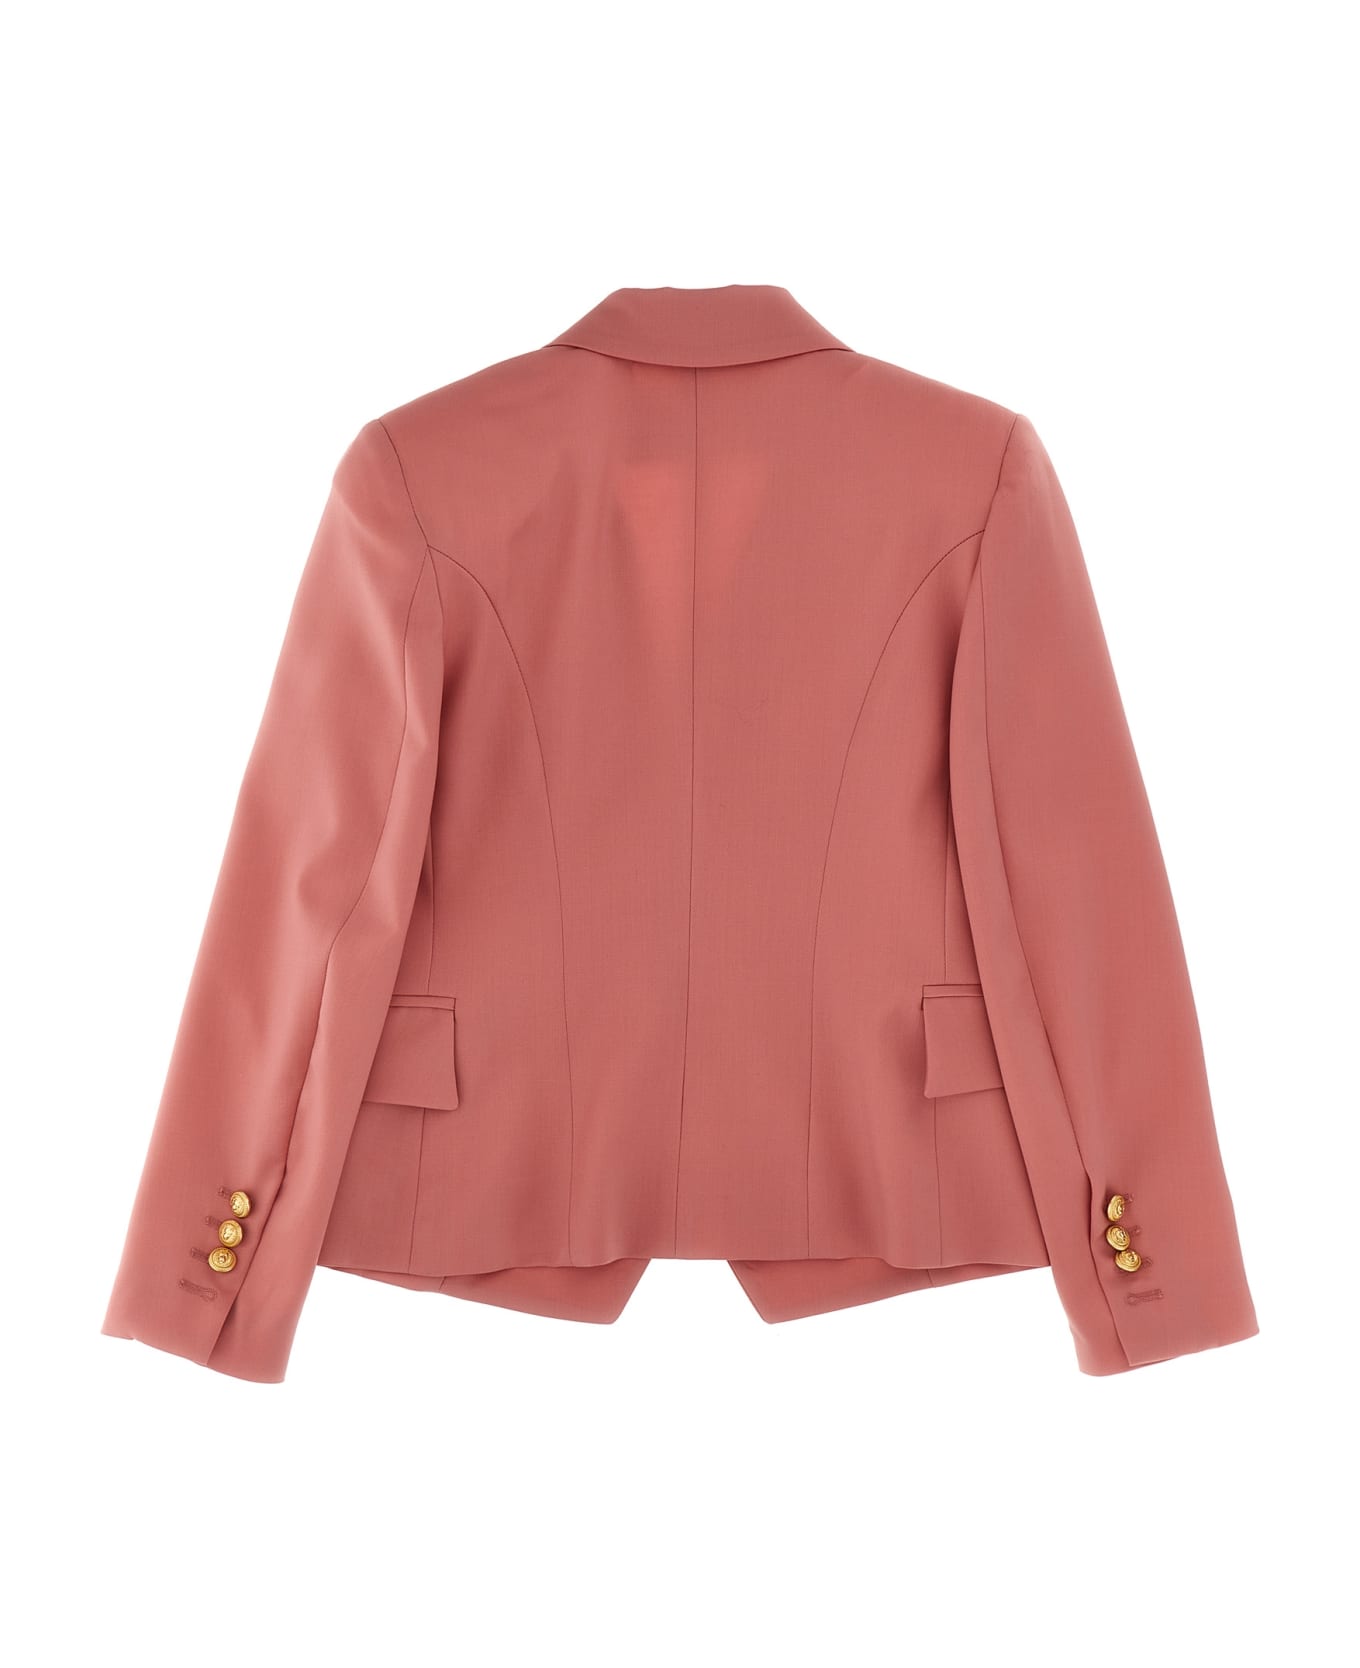 Balmain Double Breast Blazer Jacket With Logo Buttons - Pink